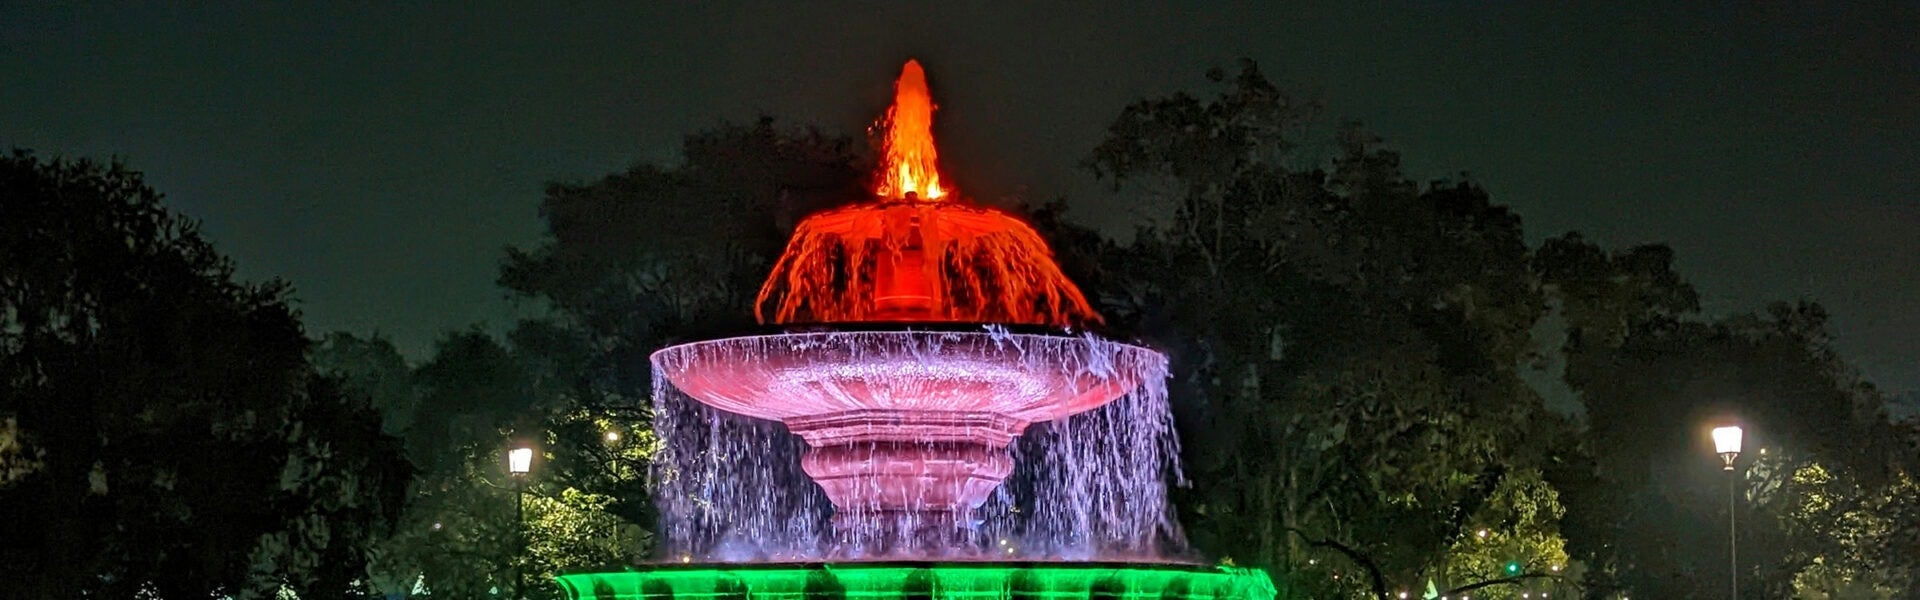 India Gate fountain at night